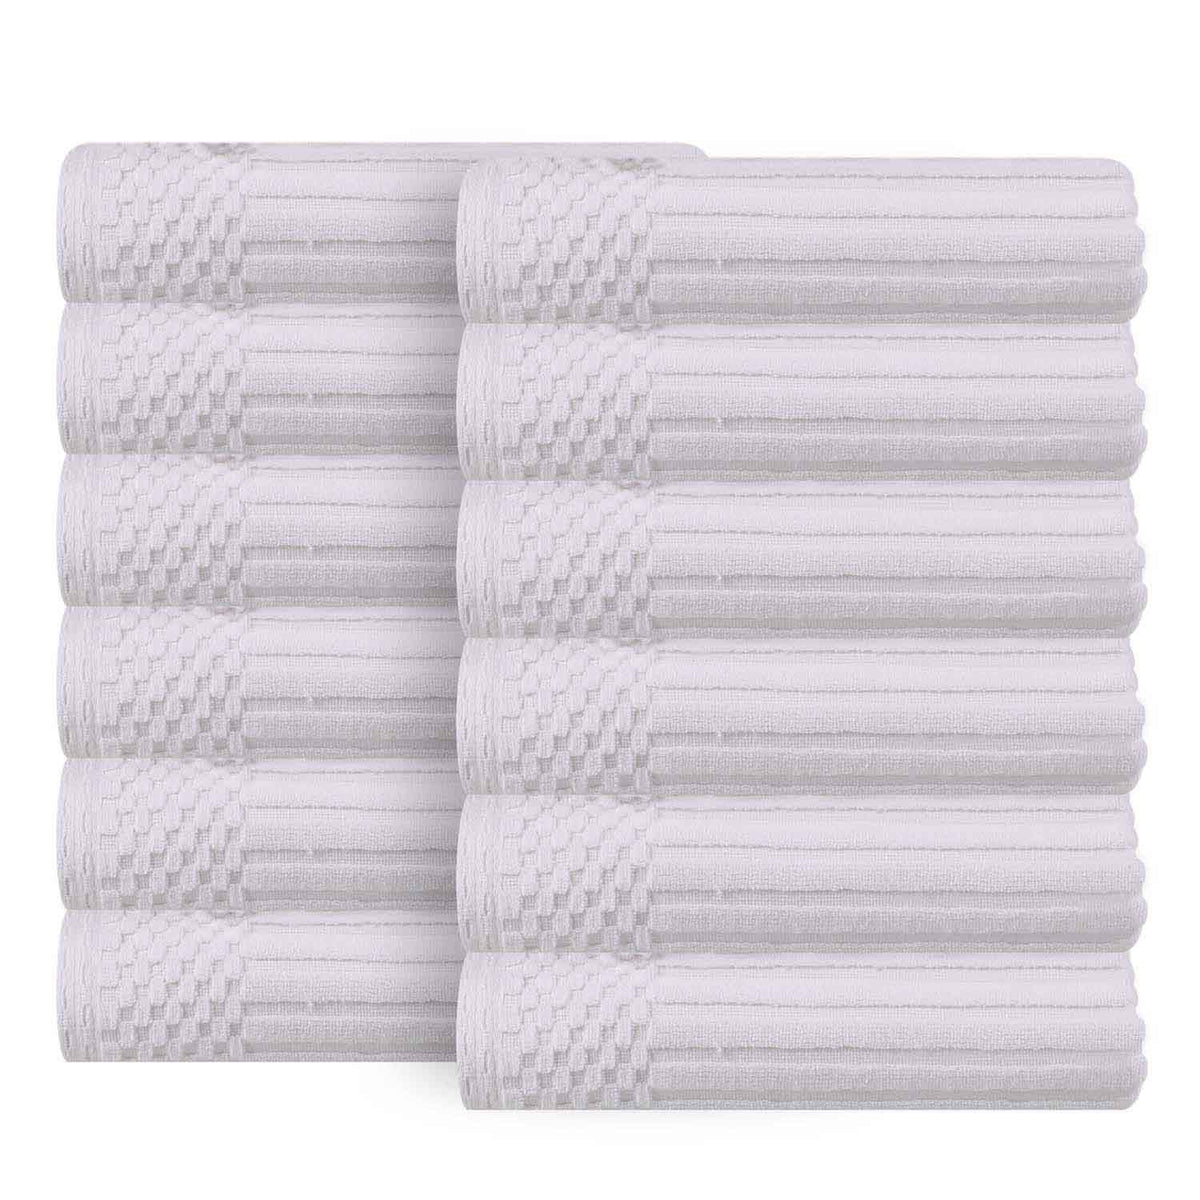 Soho Ribbed Cotton Absorbent Face Towel / Washcloth Set of 12 - White